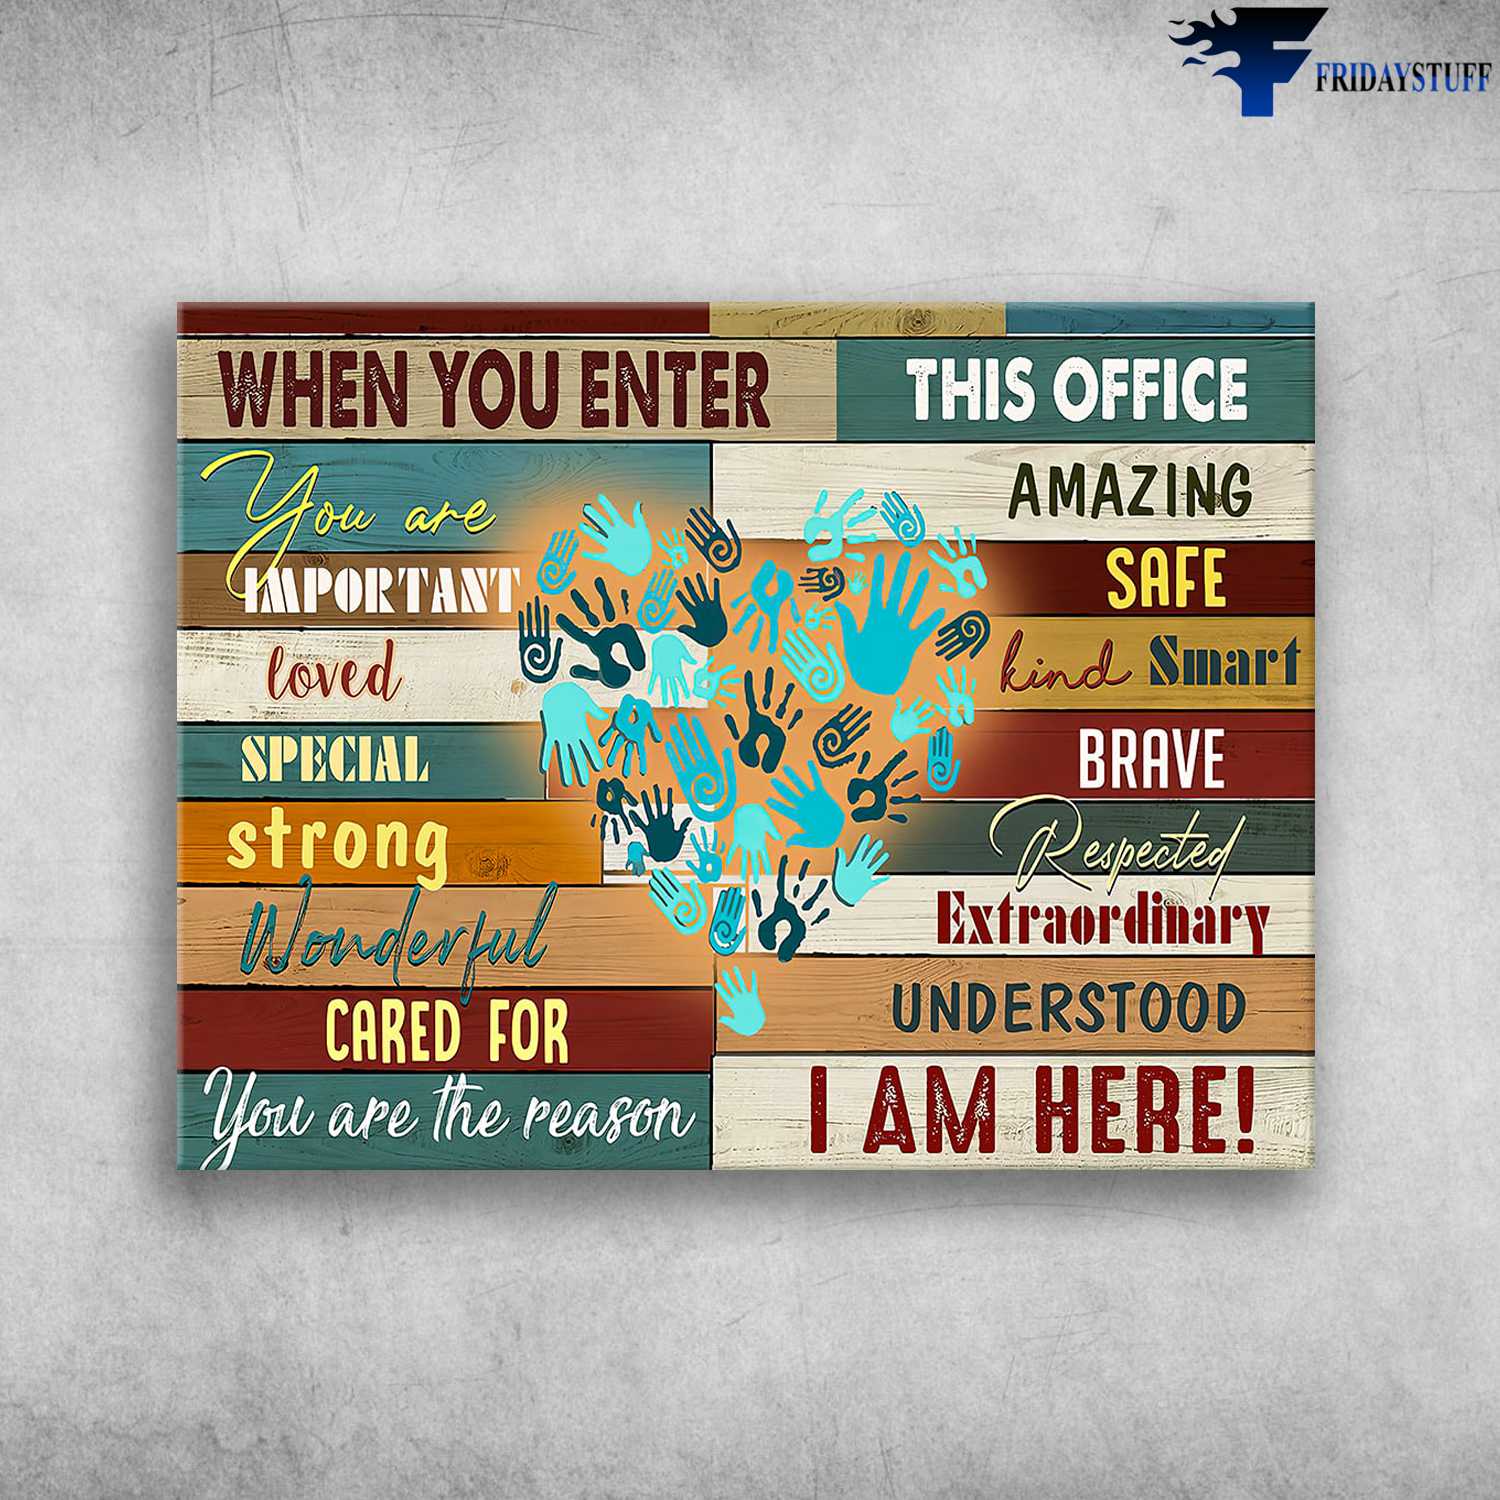 Office Poster - When You Enter This Offive, You Are Important, Amazing, Safe, Loved, Special, Strong, Wonderful, Cared For, You Are The Season I Am Here